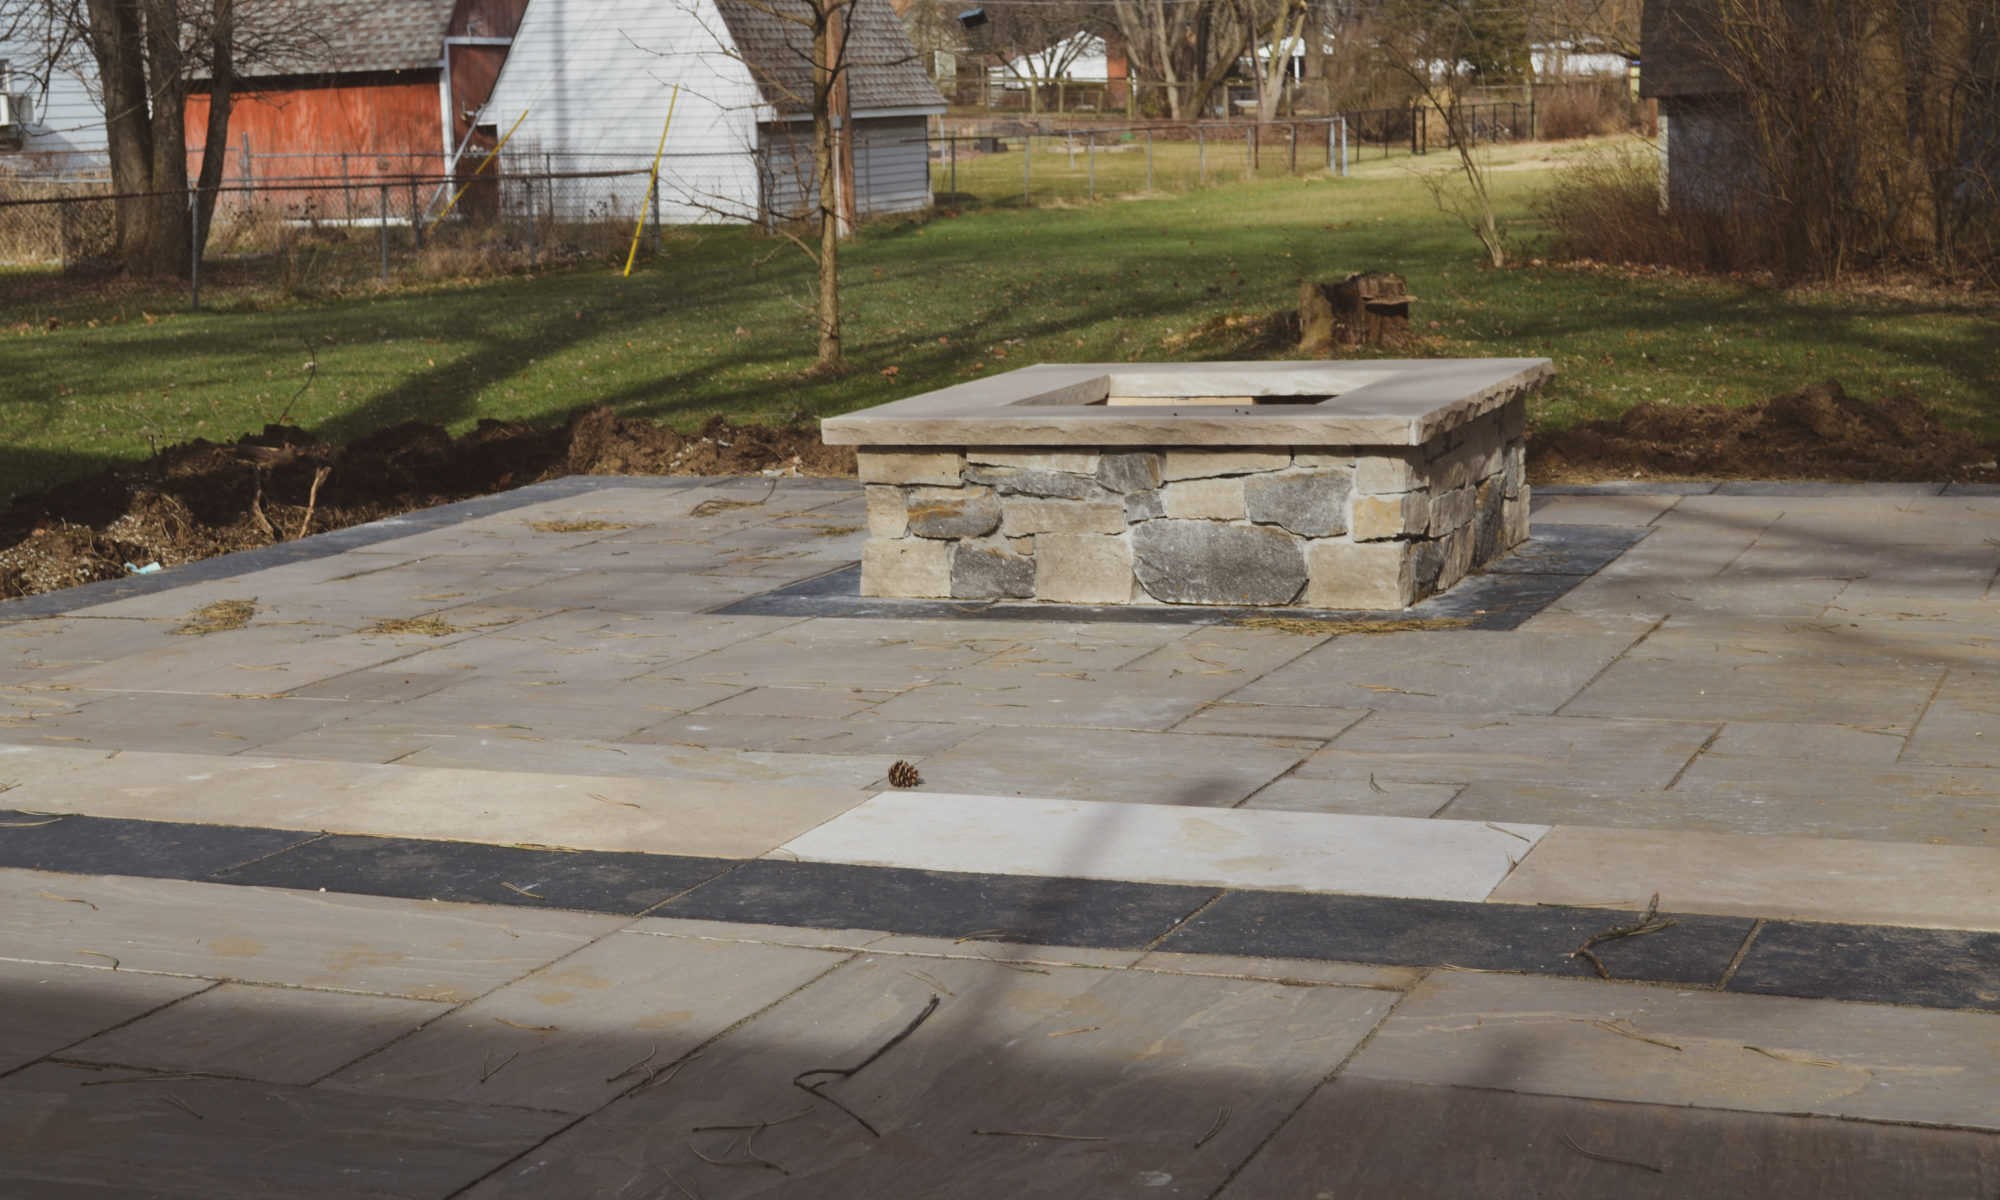 Precision Outdoors Two Step patio paver patio fire pit firepit Greenwood indiana simple backyard